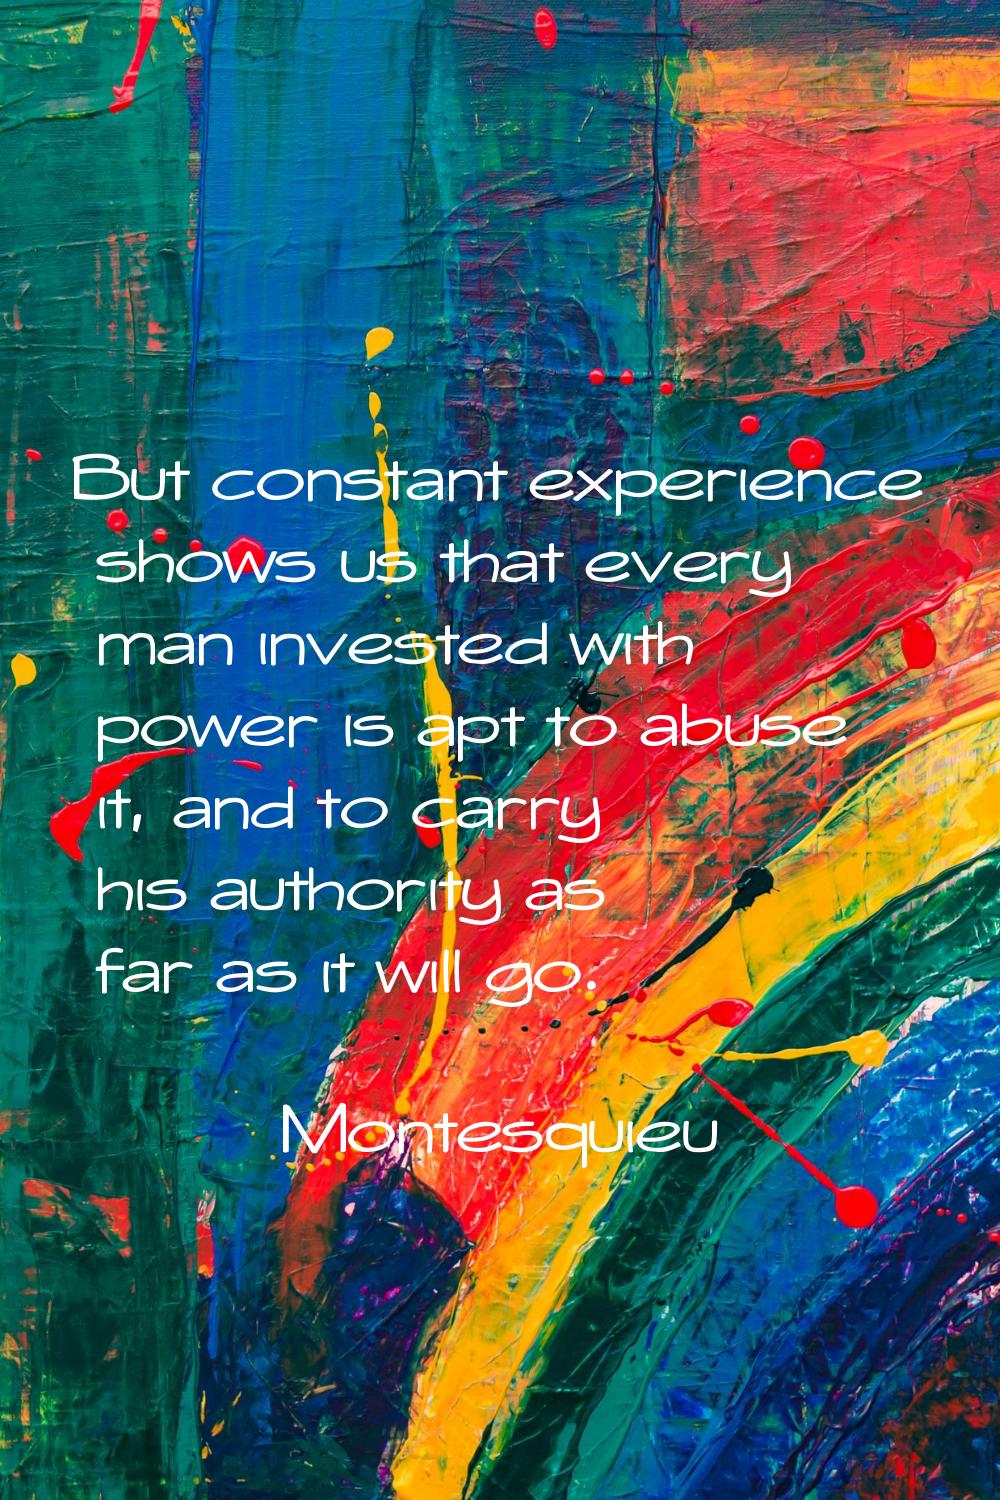 But constant experience shows us that every man invested with power is apt to abuse it, and to carr